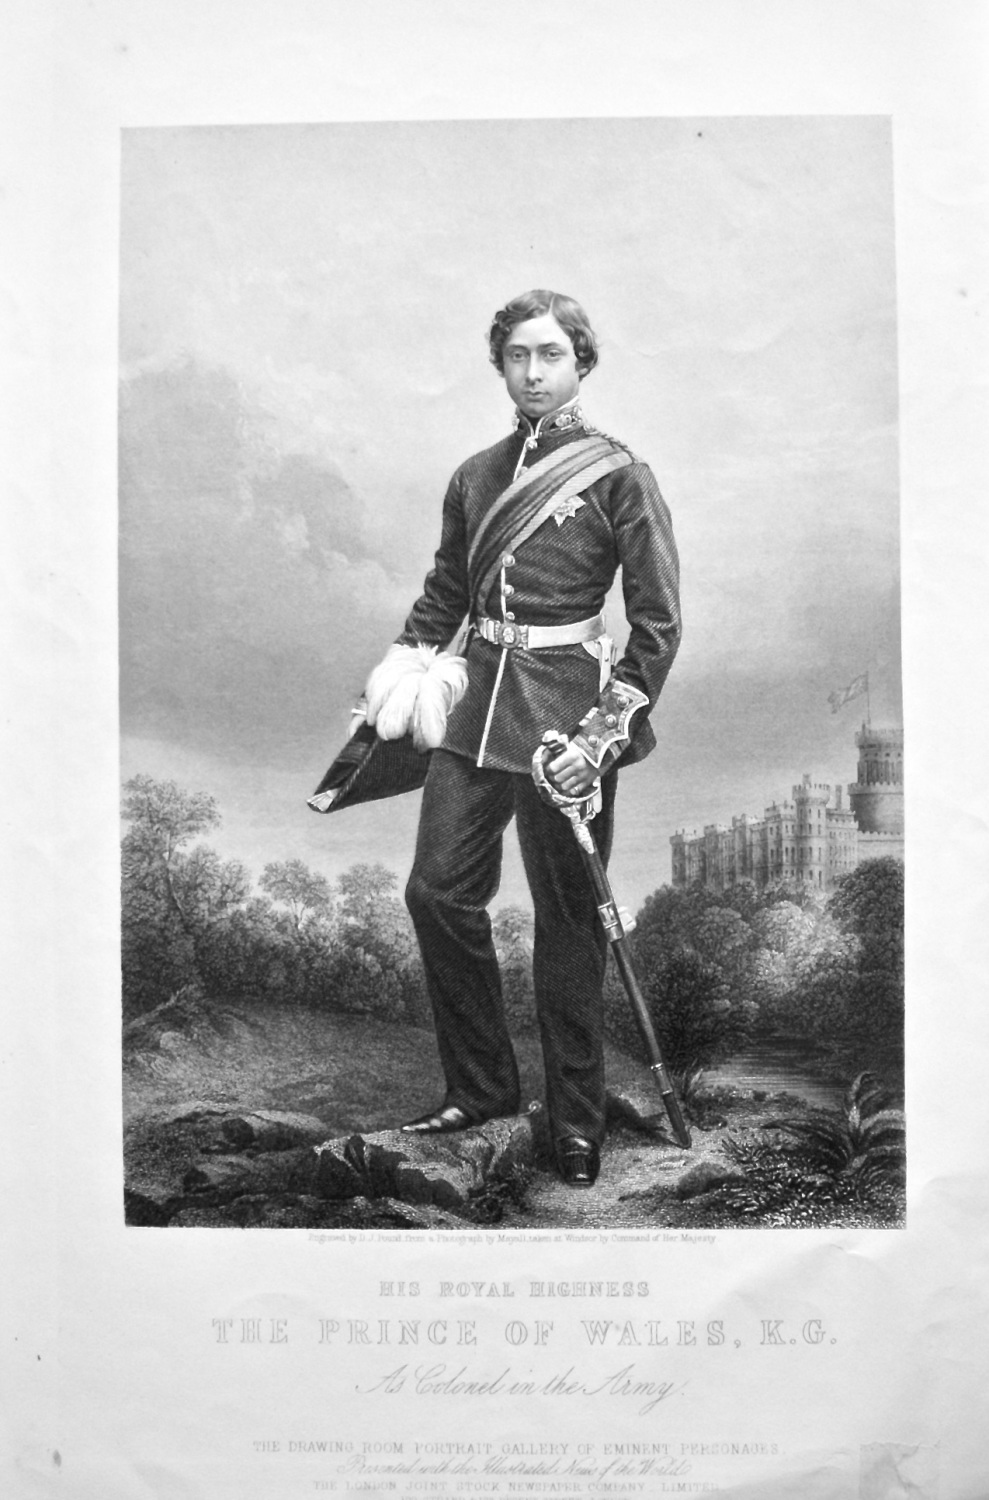 His Royal Highness The Prince of Wales, K.G. A Colonel in the Army.  1858c.